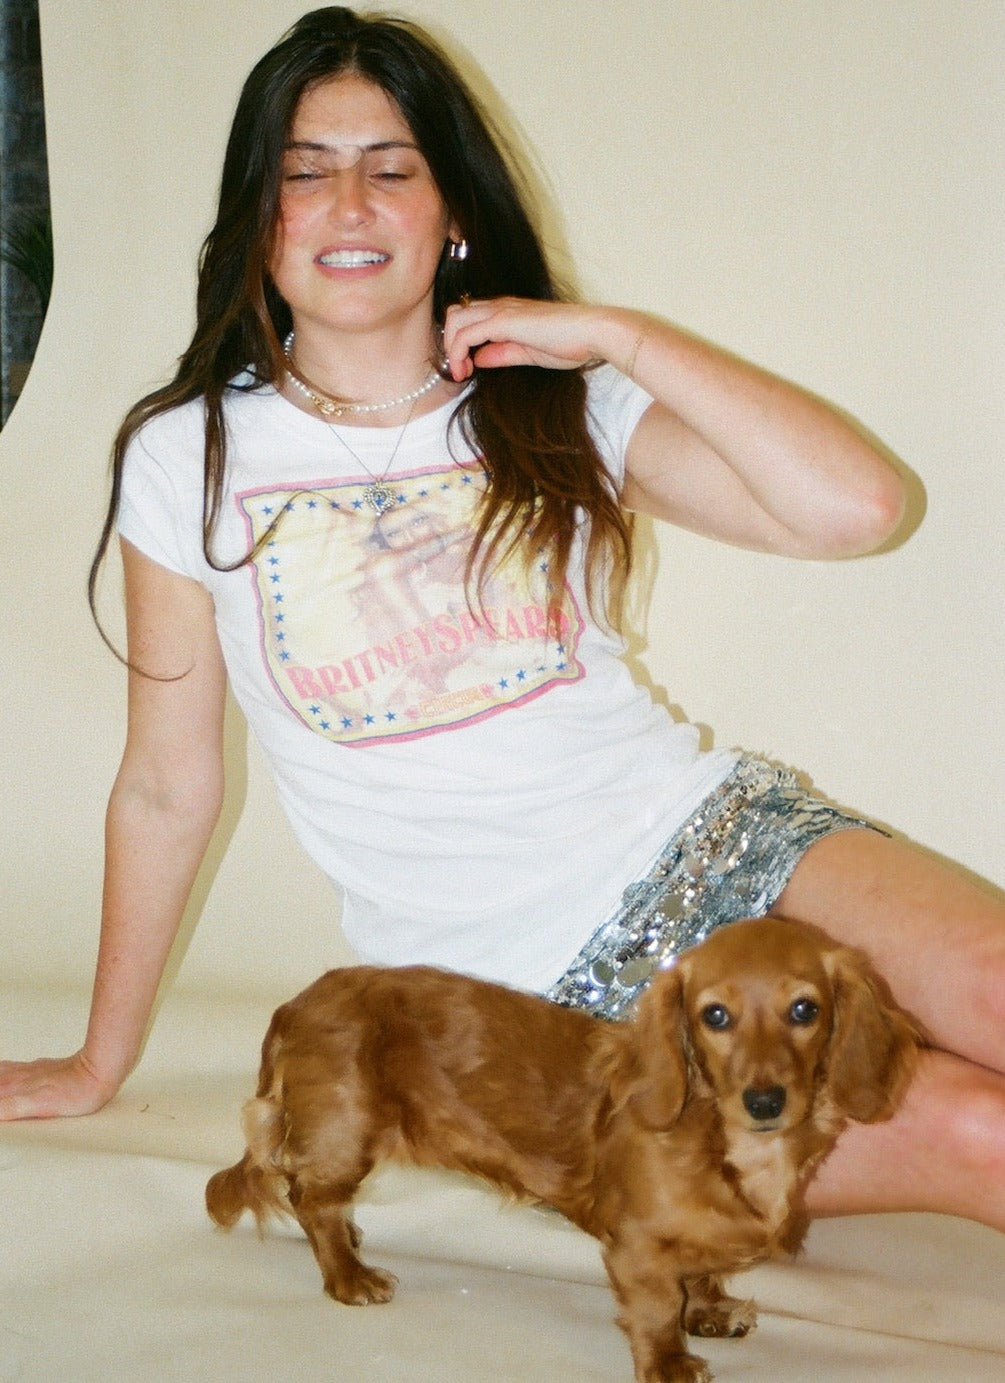 2008 BRITNEY SPEARS CIRCUS T-SHIRT